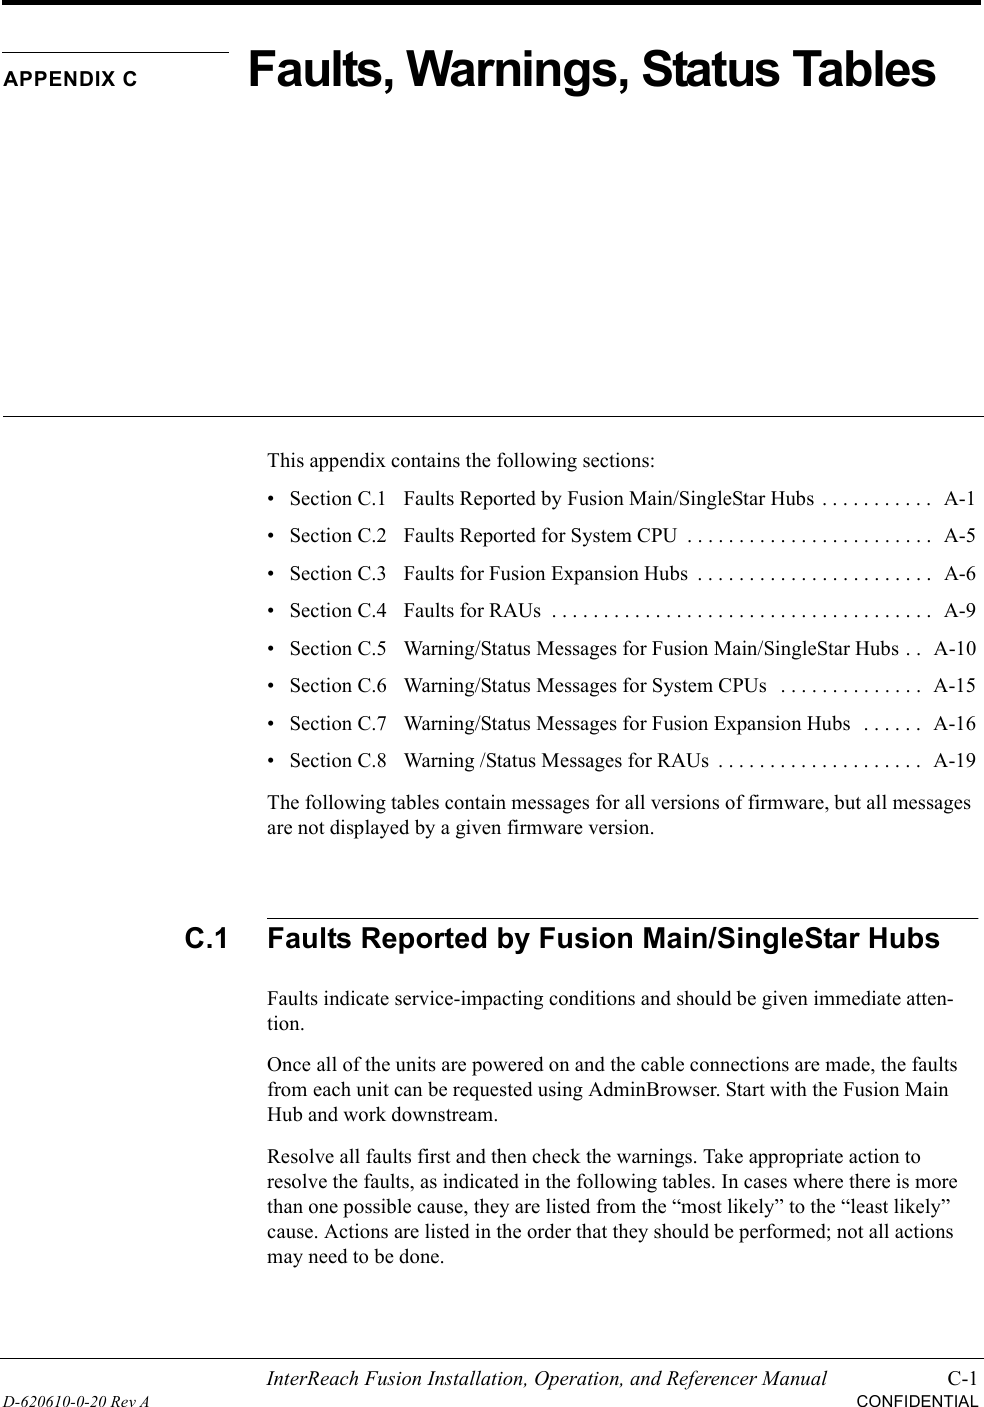 InterReach Fusion Installation, Operation, and Referencer Manual C-1D-620610-0-20 Rev ACONFIDENTIALAPPENDIX CFaults, Warnings, Status TablesThis appendix contains the following sections:• Section C.1   Faults Reported by Fusion Main/SingleStar Hubs  . . . . . . . . . . .   A-1• Section C.2   Faults Reported for System CPU  . . . . . . . . . . . . . . . . . . . . . . . .  A-5• Section C.3   Faults for Fusion Expansion Hubs  . . . . . . . . . . . . . . . . . . . . . . .  A-6• Section C.4   Faults for RAUs  . . . . . . . . . . . . . . . . . . . . . . . . . . . . . . . . . . . . .   A-9• Section C.5   Warning/Status Messages for Fusion Main/SingleStar Hubs . .  A-10• Section C.6   Warning/Status Messages for System CPUs   . . . . . . . . . . . . . .  A-15• Section C.7   Warning/Status Messages for Fusion Expansion Hubs   . . . . . .  A-16• Section C.8   Warning /Status Messages for RAUs  . . . . . . . . . . . . . . . . . . . .   A-19The following tables contain messages for all versions of firmware, but all messages are not displayed by a given firmware version.C.1 Faults Reported by Fusion Main/SingleStar HubsFaults indicate service-impacting conditions and should be given immediate atten-tion.Once all of the units are powered on and the cable connections are made, the faults from each unit can be requested using AdminBrowser. Start with the Fusion Main Hub and work downstream.Resolve all faults first and then check the warnings. Take appropriate action to resolve the faults, as indicated in the following tables. In cases where there is more than one possible cause, they are listed from the “most likely” to the “least likely” cause. Actions are listed in the order that they should be performed; not all actions may need to be done.